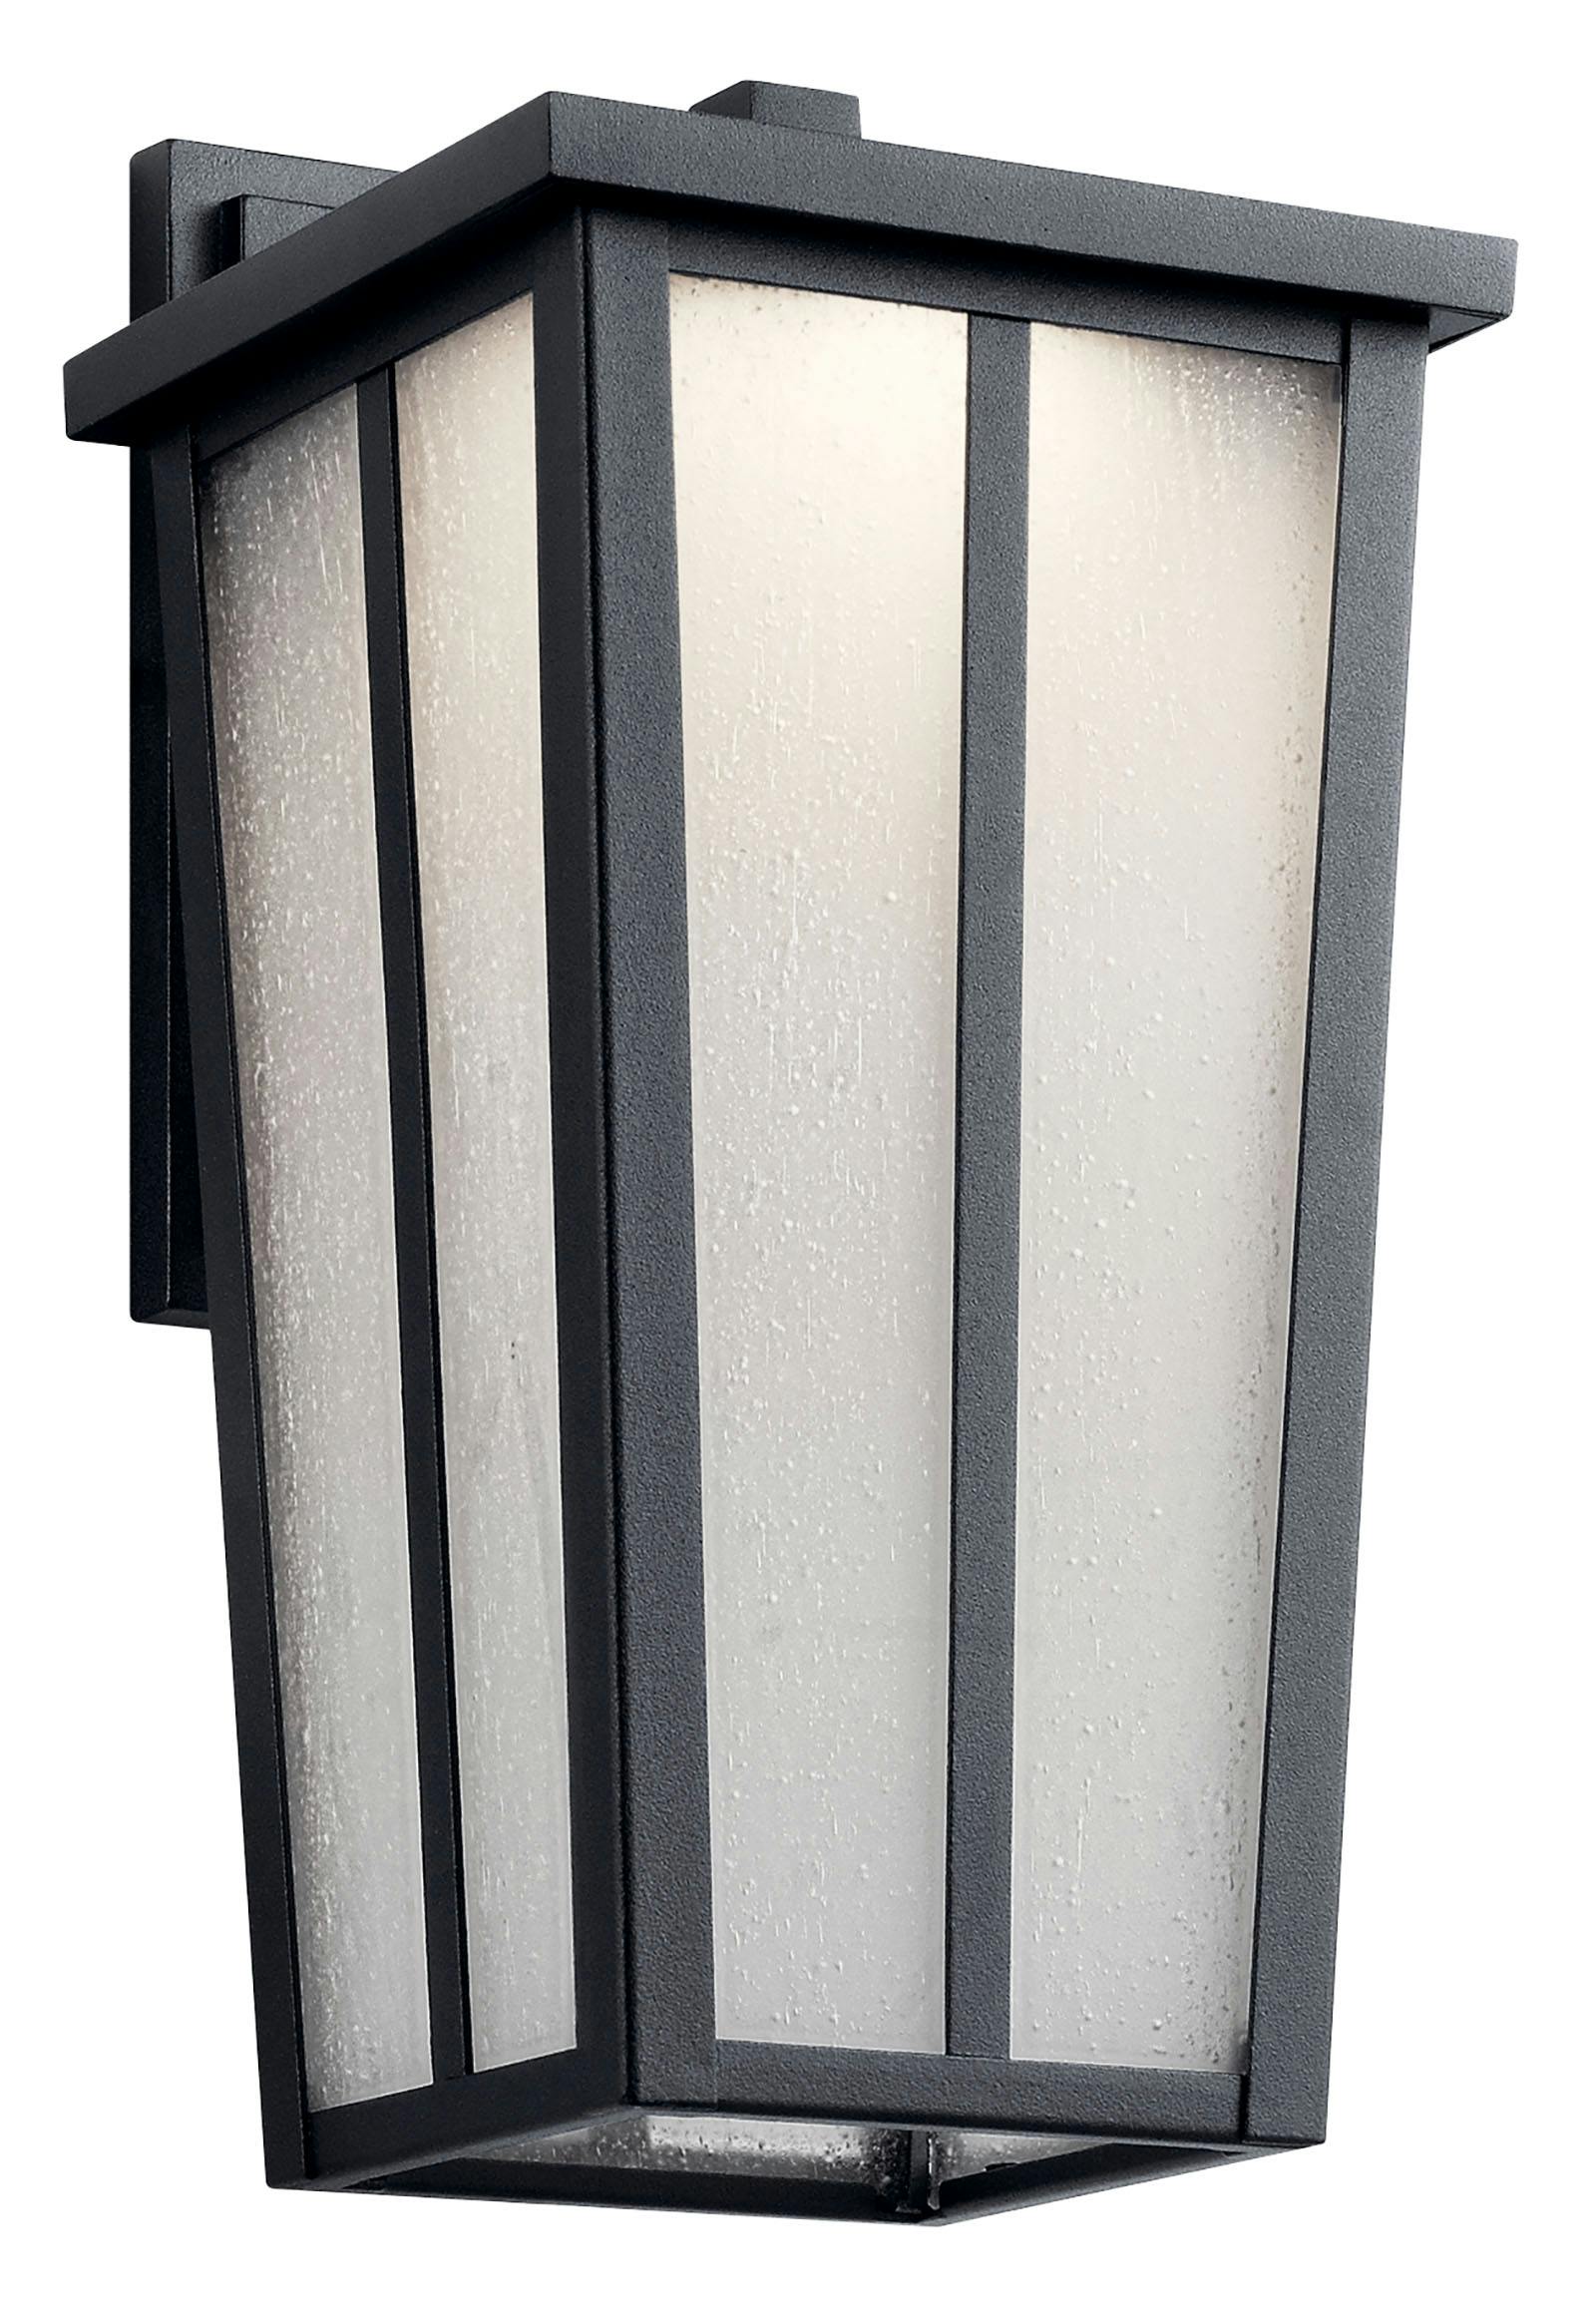 Amber Valley 13" LED Wall Light Black on a white background